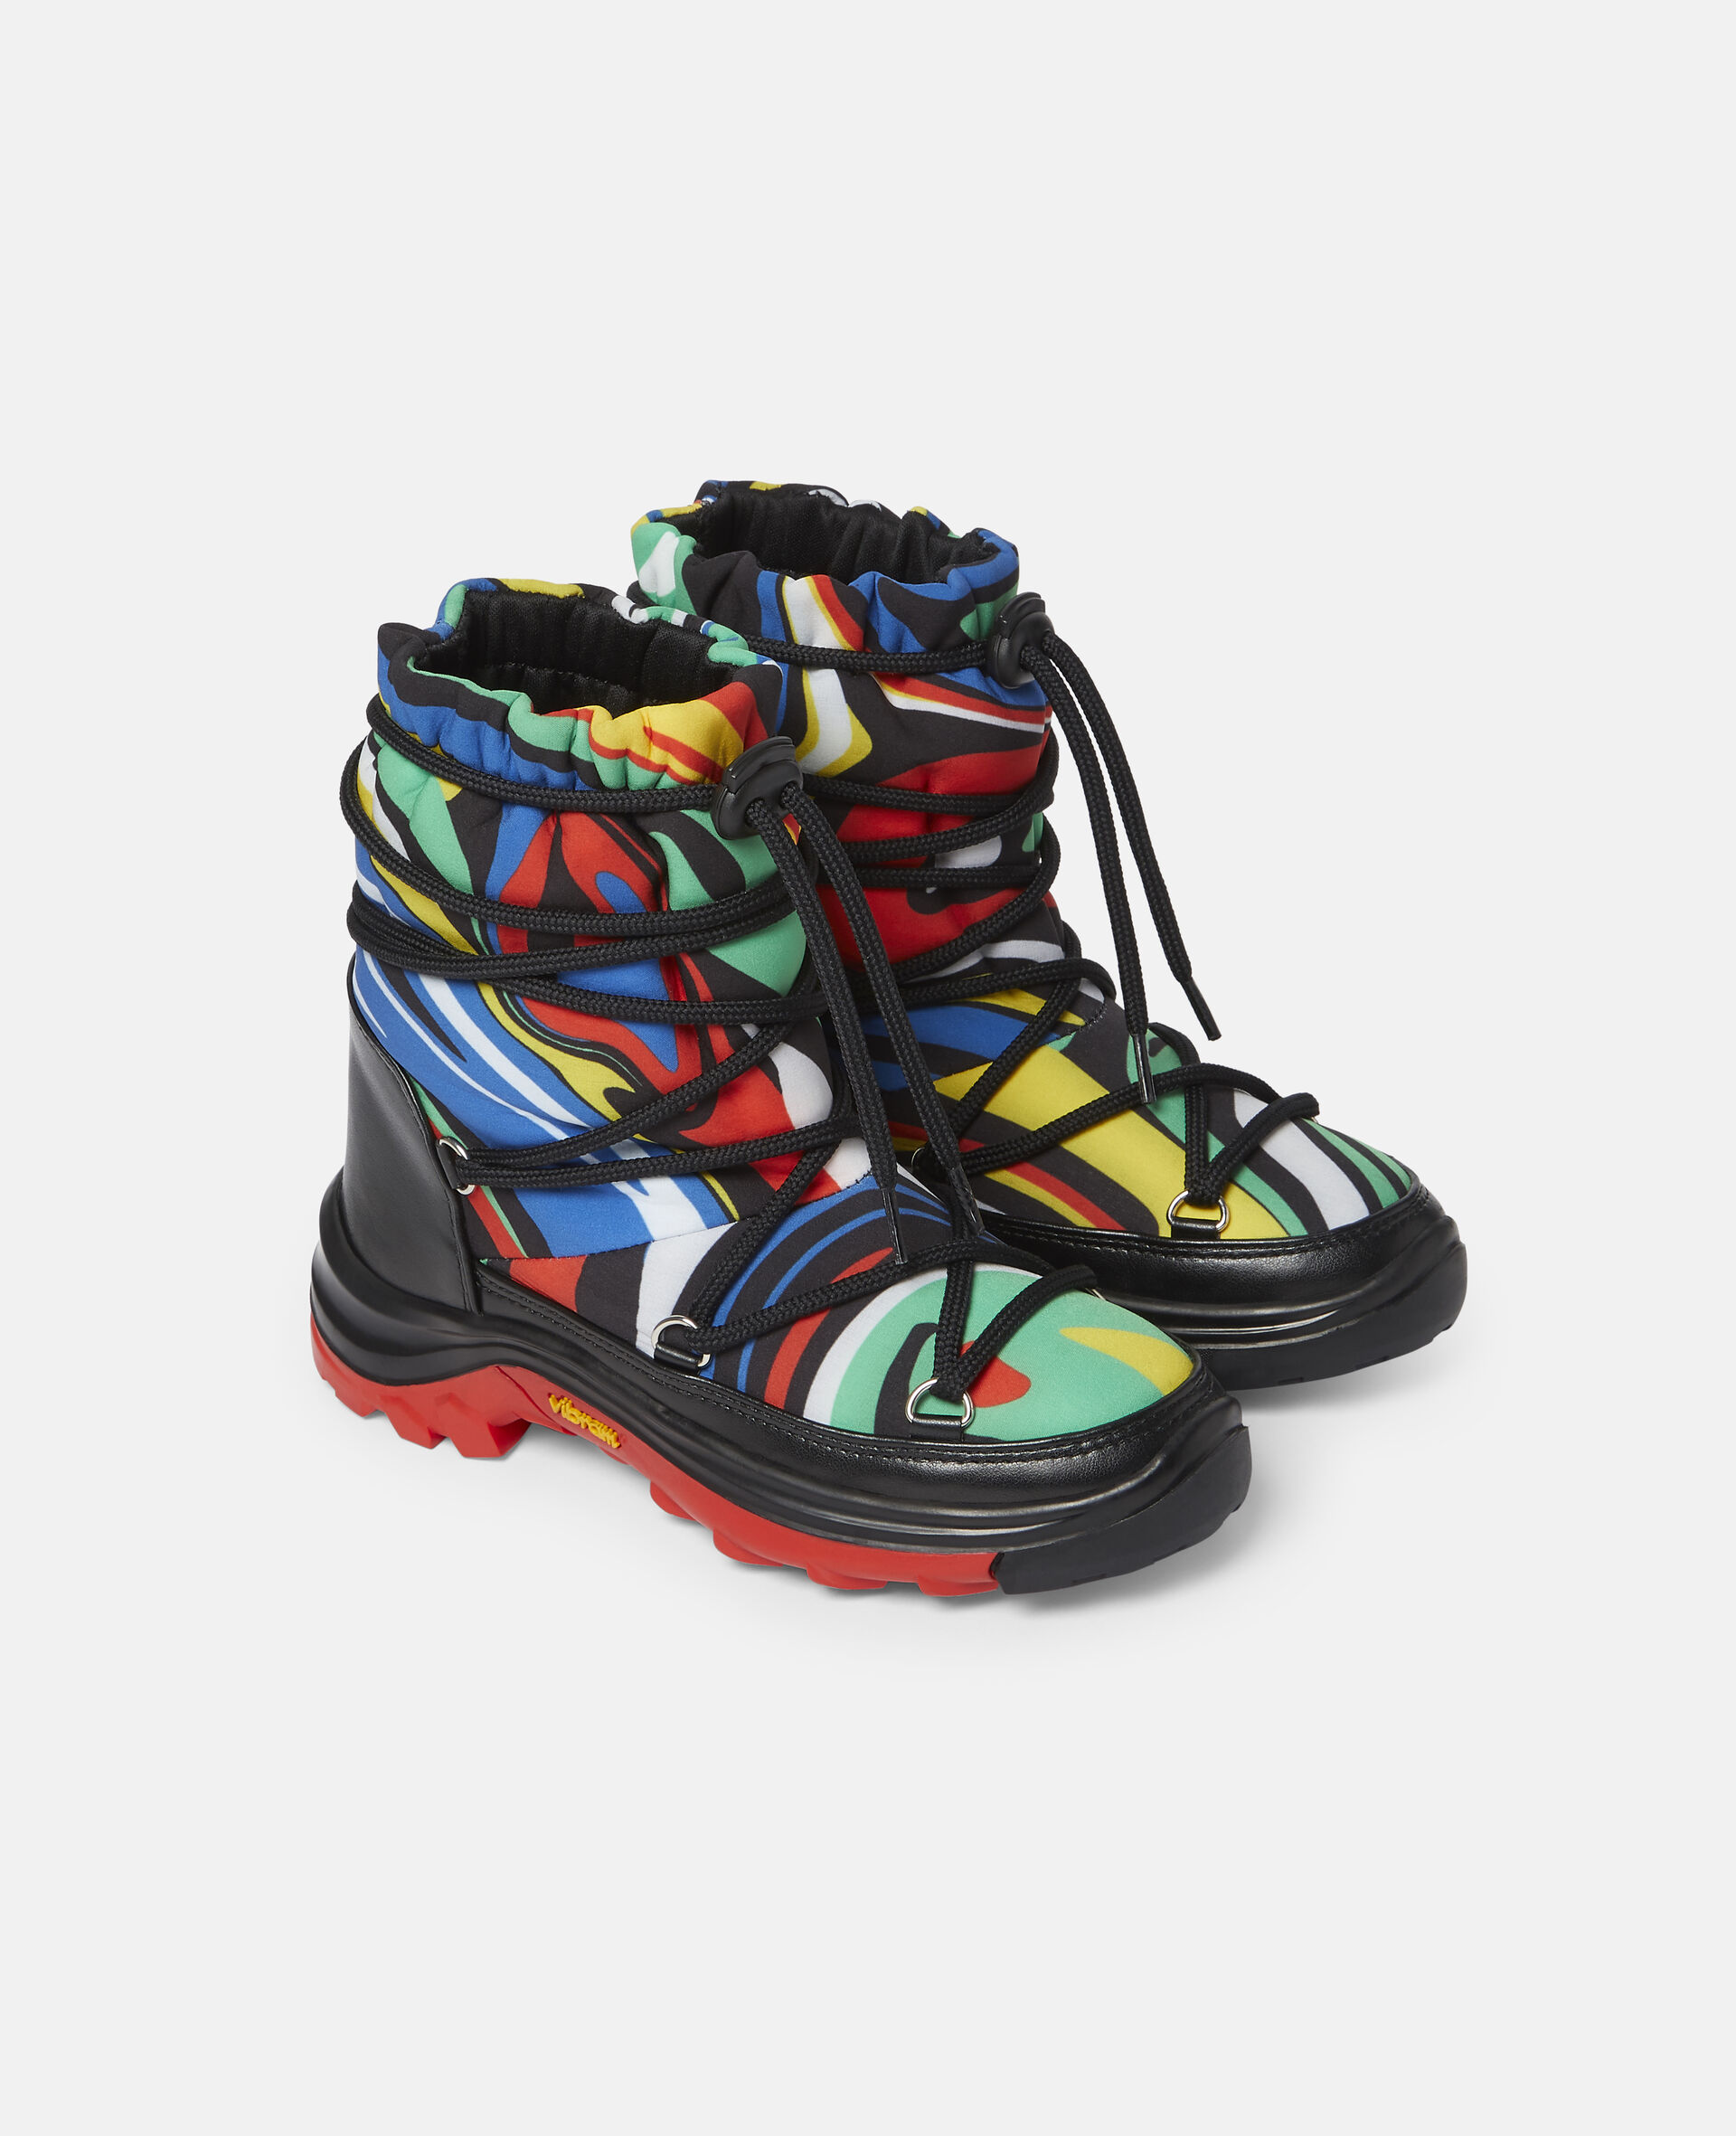 Marble Ski Boots-Multicolour-large image number 3